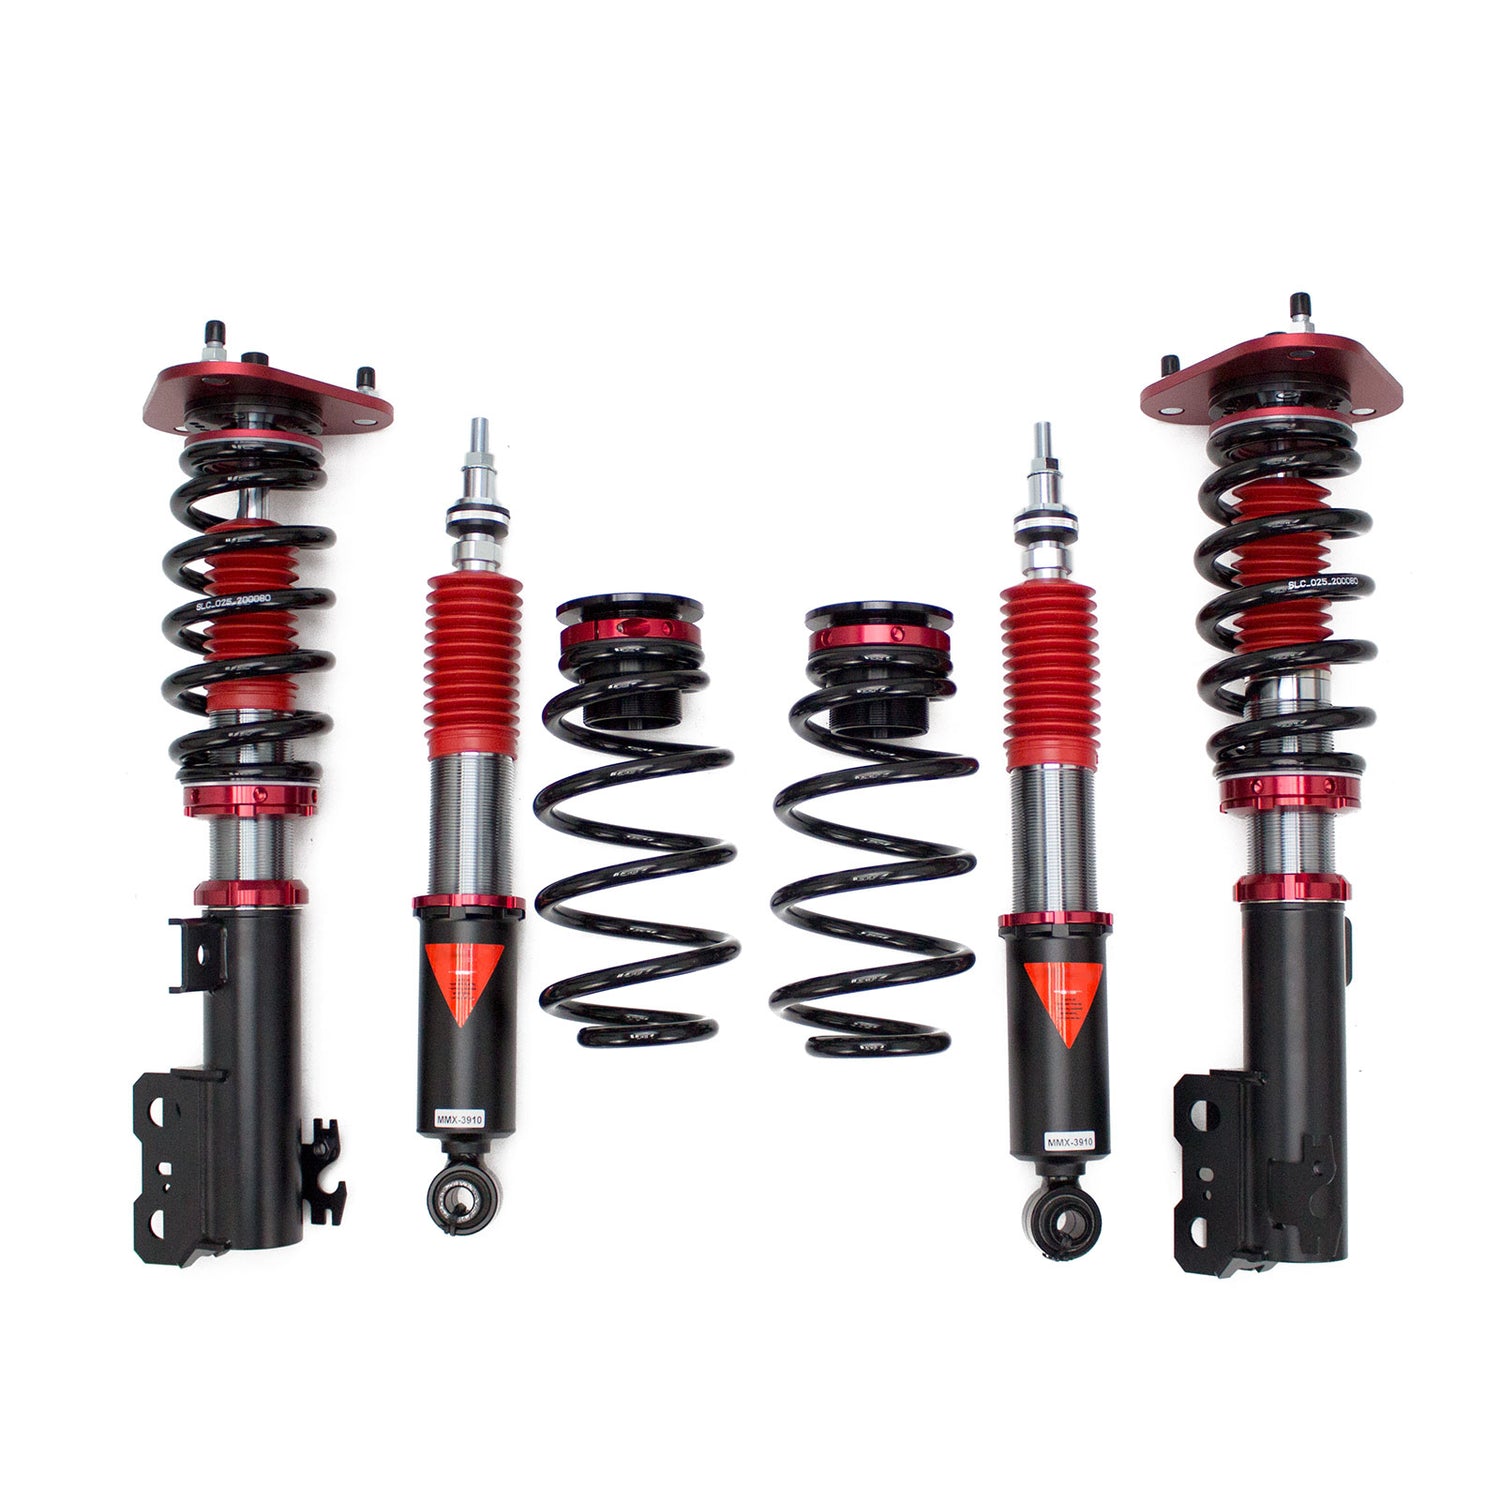 MMX3910 MAXX Coilovers Lowering Kit, Fully Adjustable, Ride Height, 40 Clicks Rebound Settings, Toyota C-HR 2017+UP